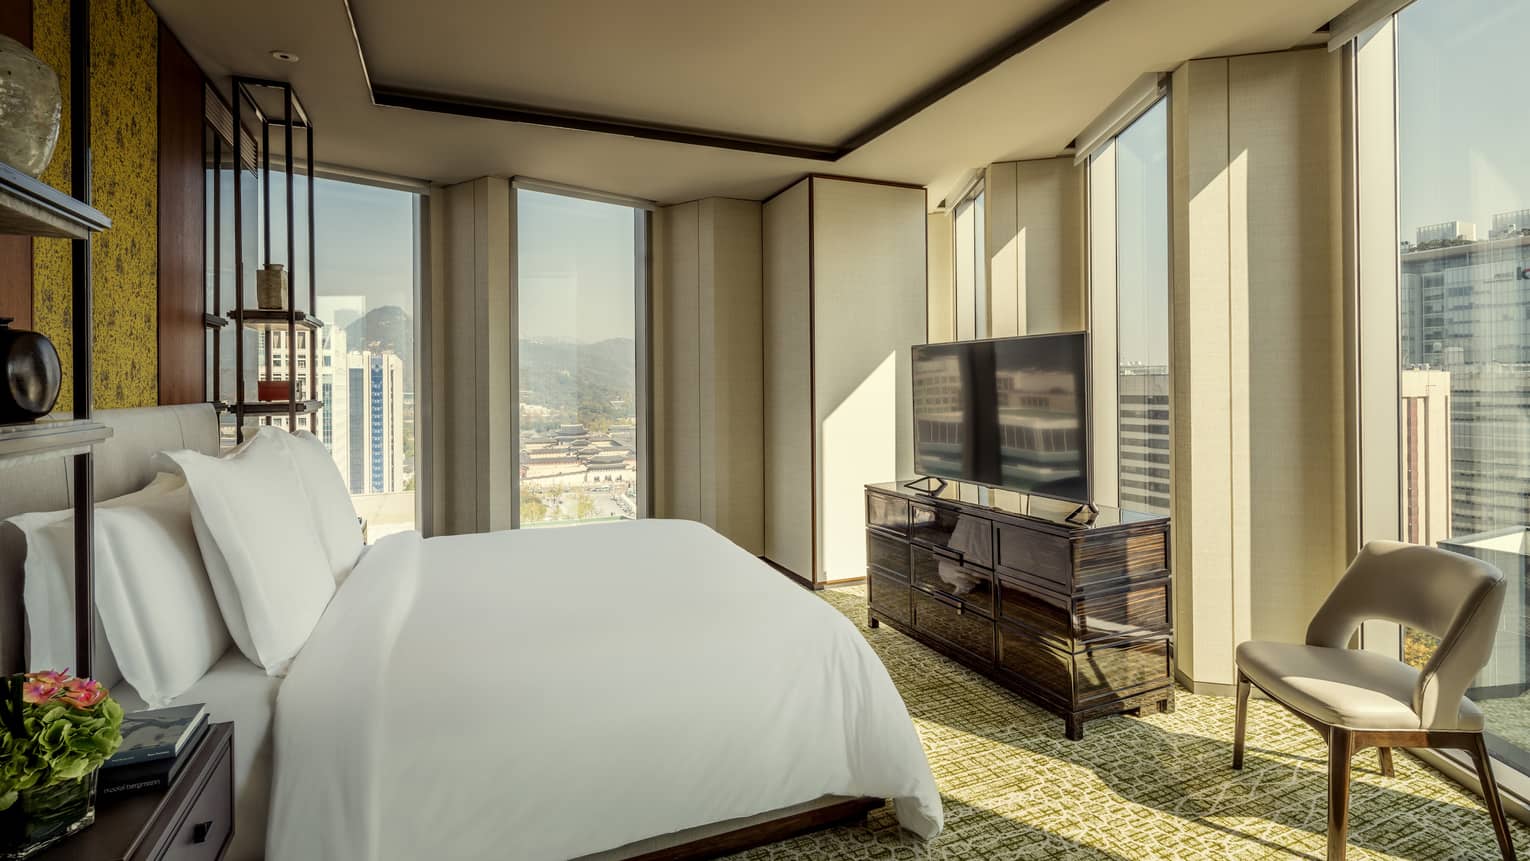 Corner guest room with bed and white linens, dresser and flatscreen TV, armchair, floor-to-ceiling windows with city views